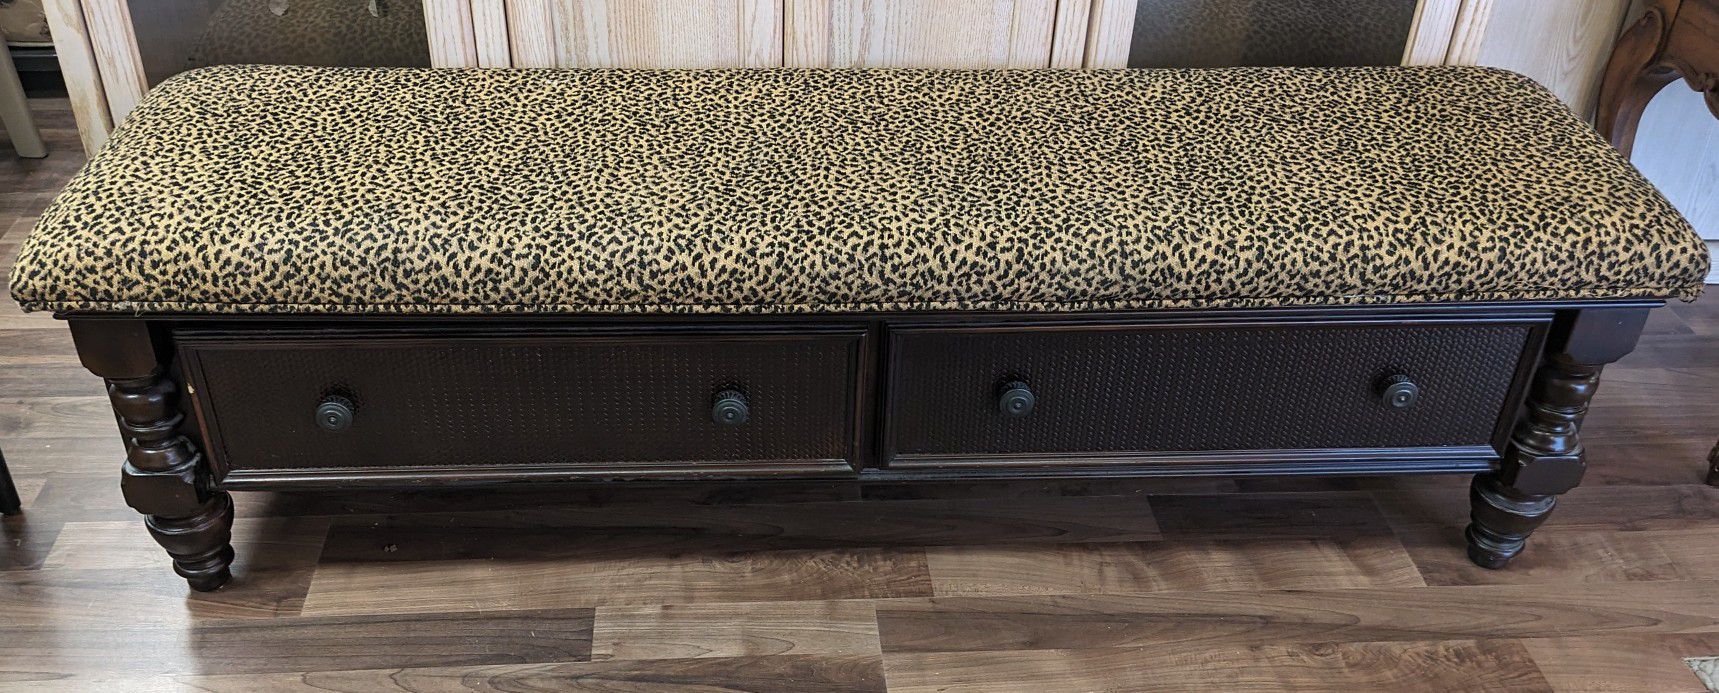 Padded Leopard Covered Storage Bench 